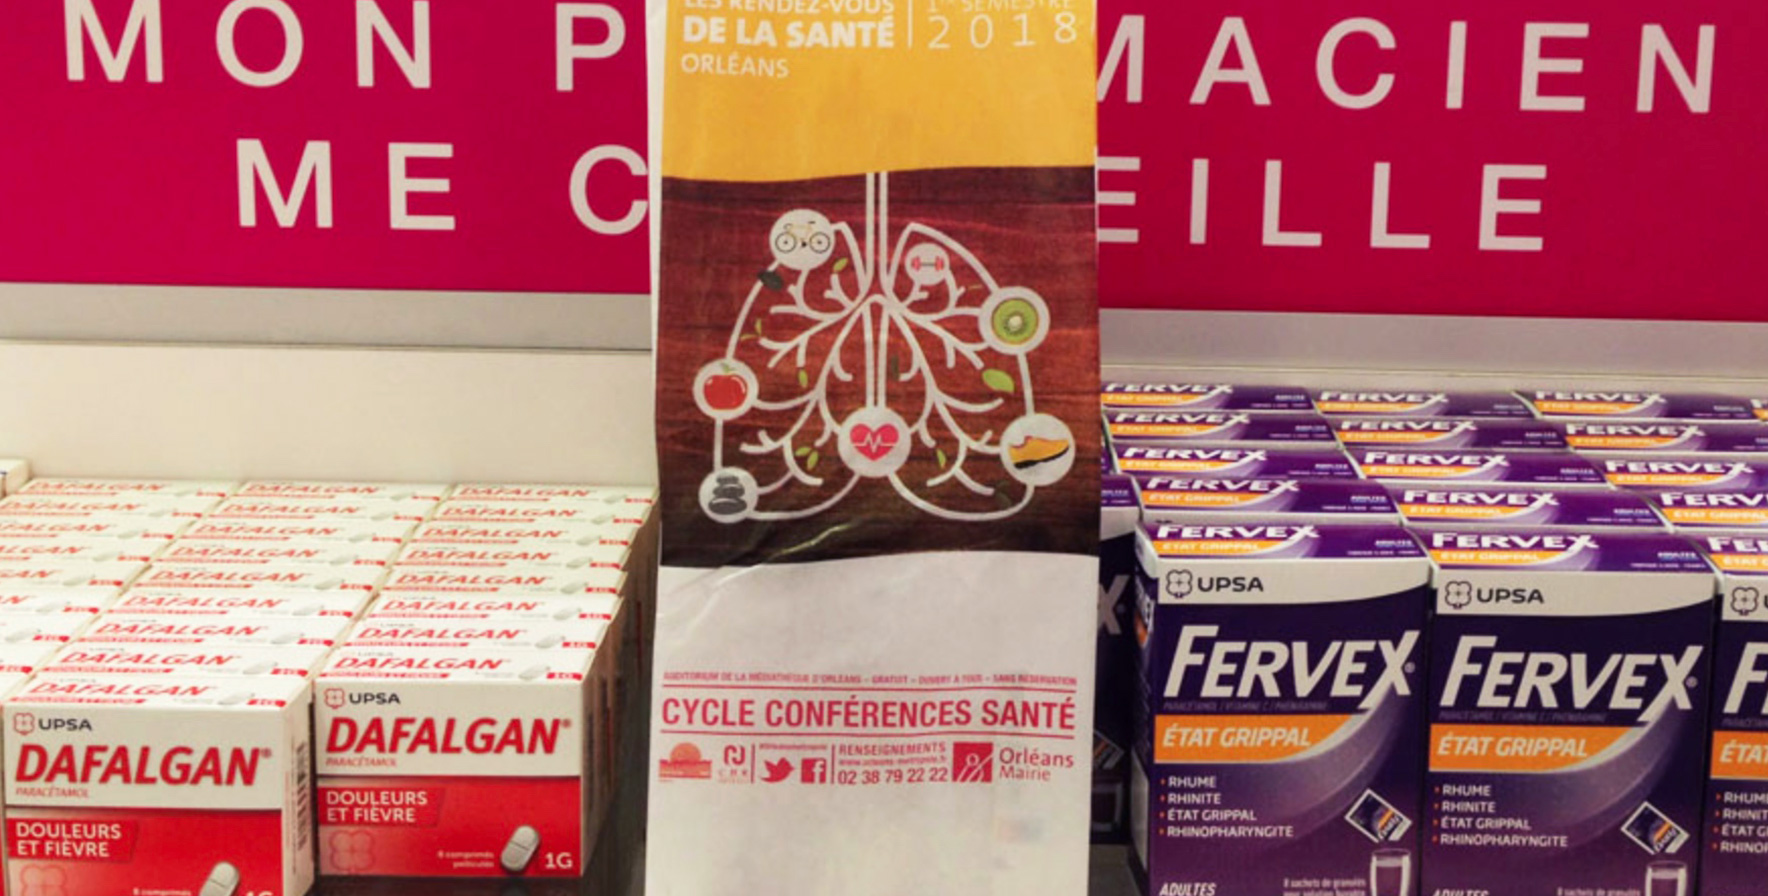 sac a pharmacie publicitaire, support tactique - Keemia Communication OOH et hors-media